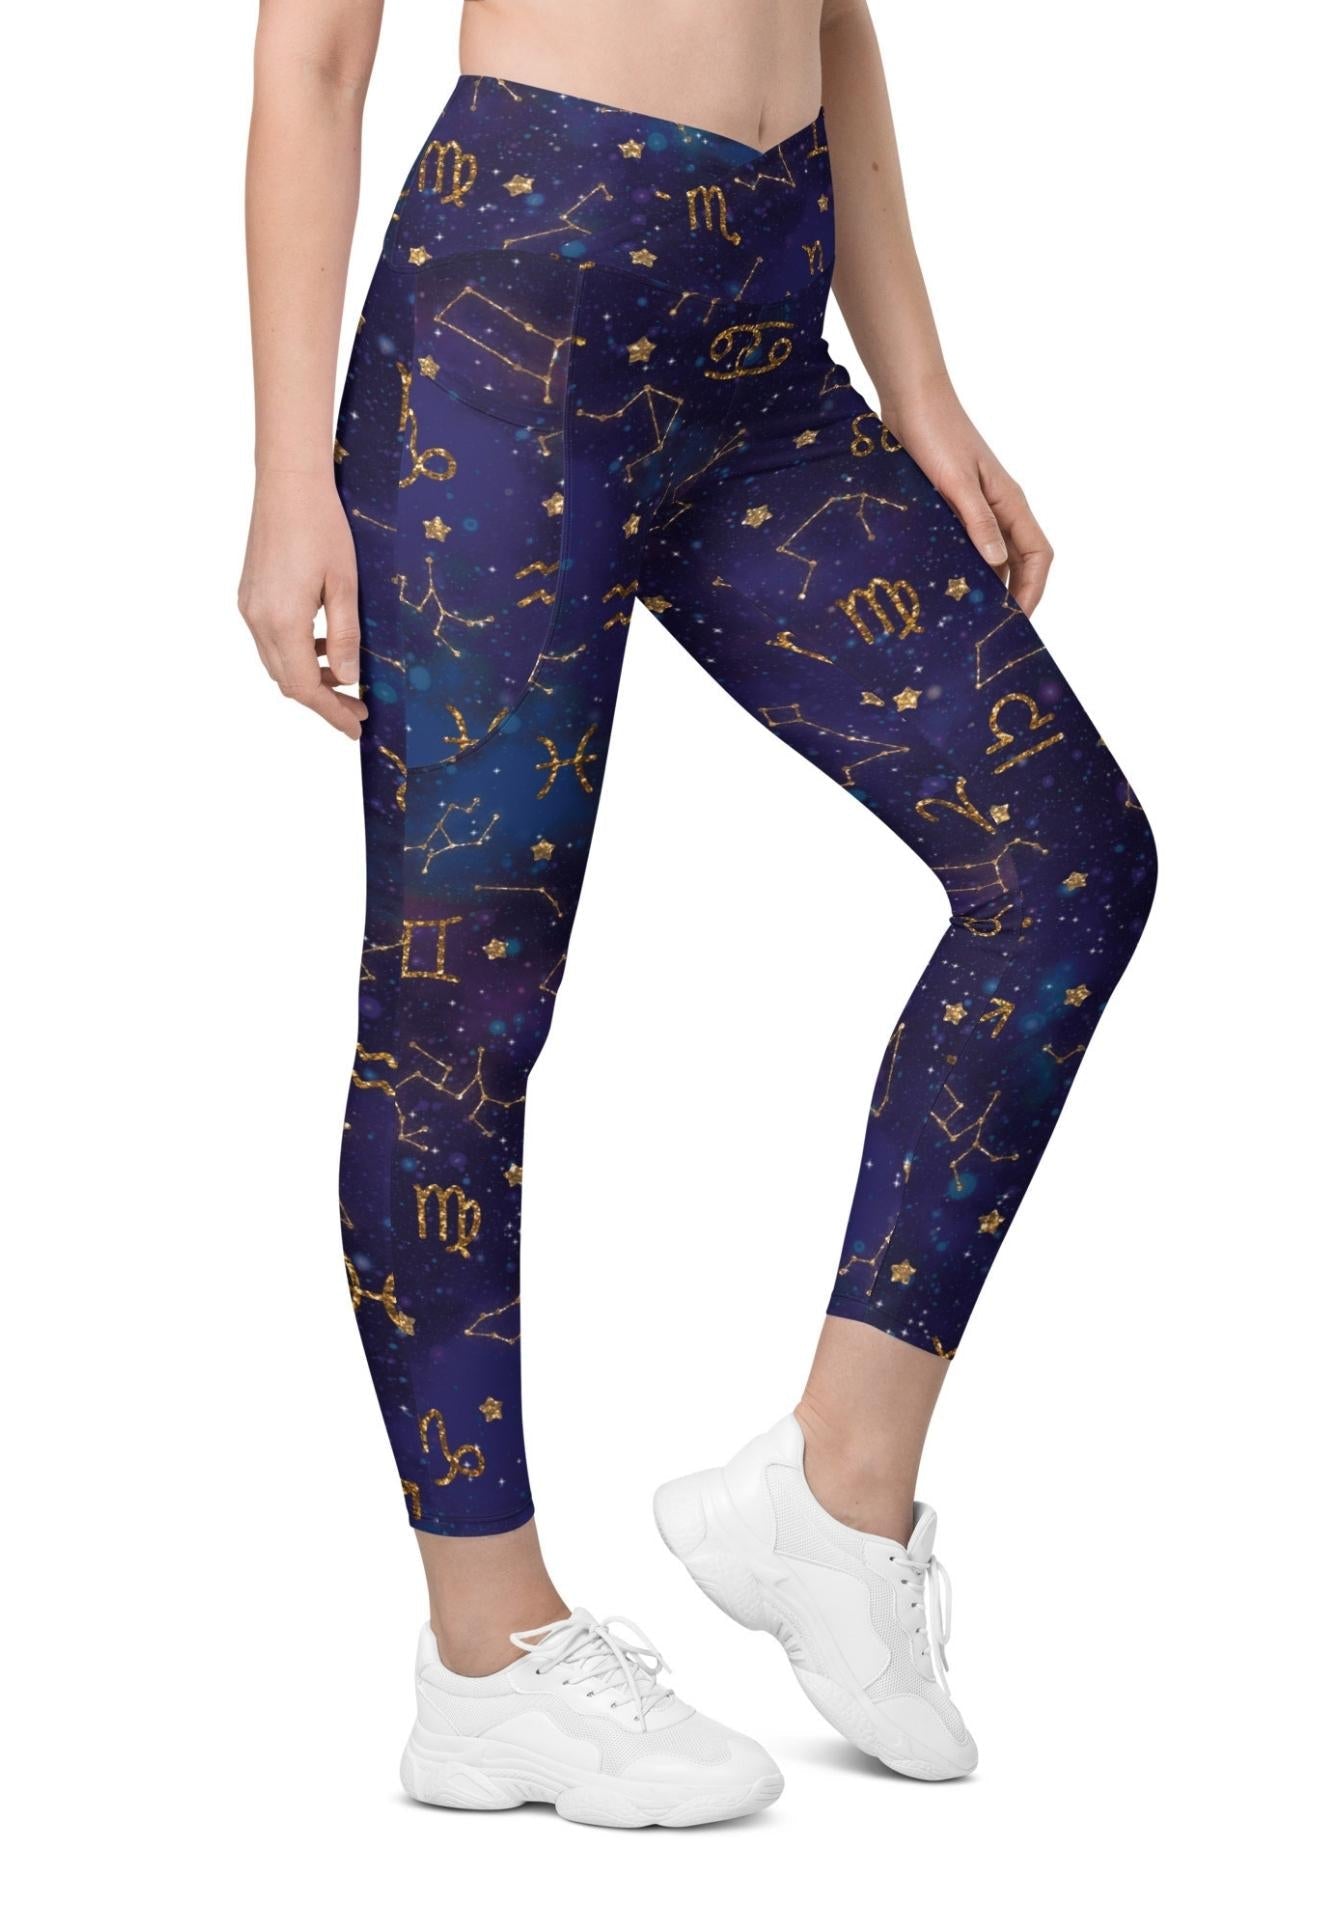 Zodiac Signs Crossover Leggings With Pockets